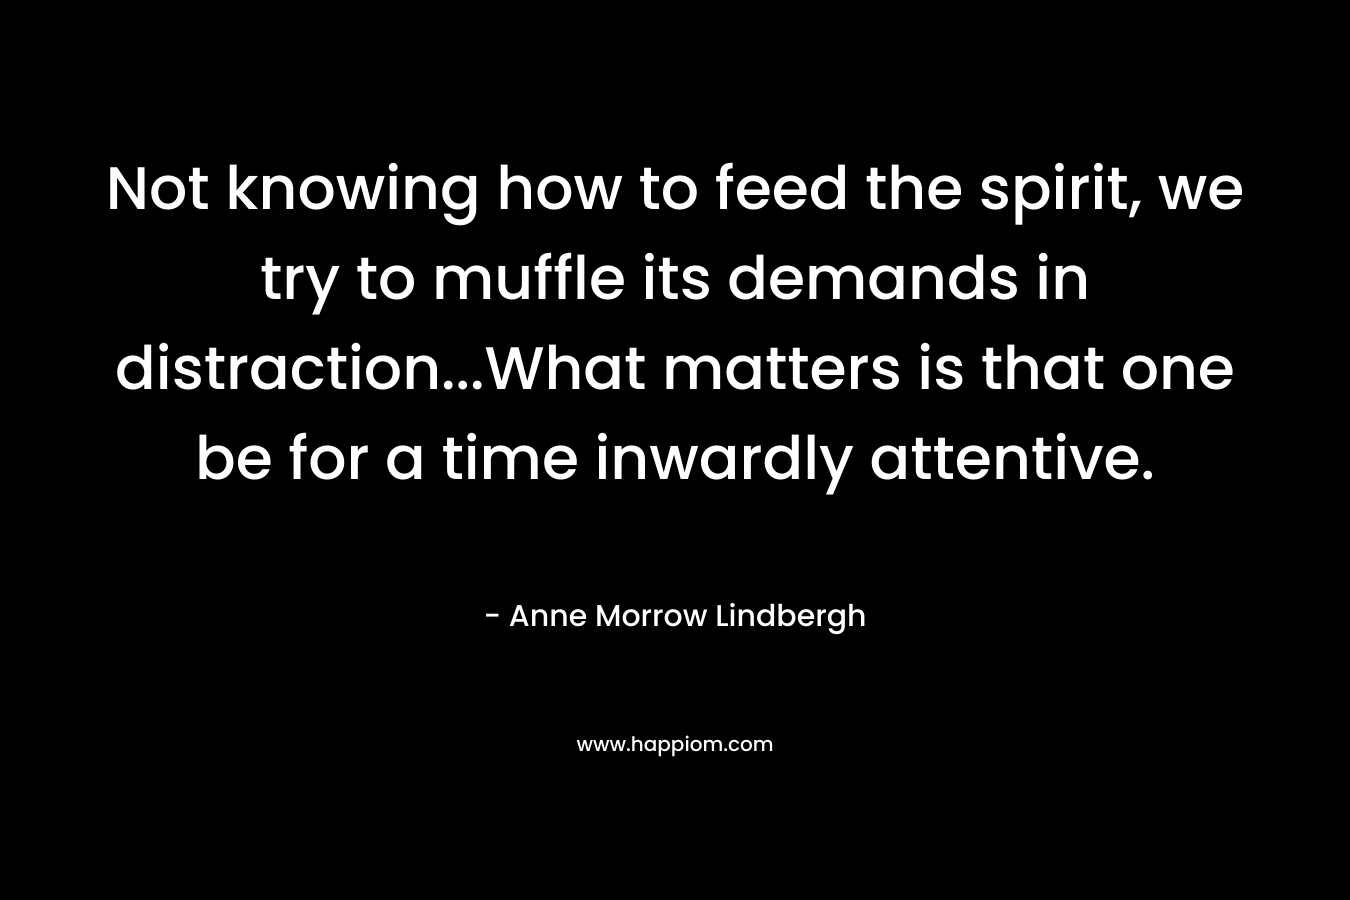 Not knowing how to feed the spirit, we try to muffle its demands in distraction…What matters is that one be for a time inwardly attentive. – Anne Morrow Lindbergh